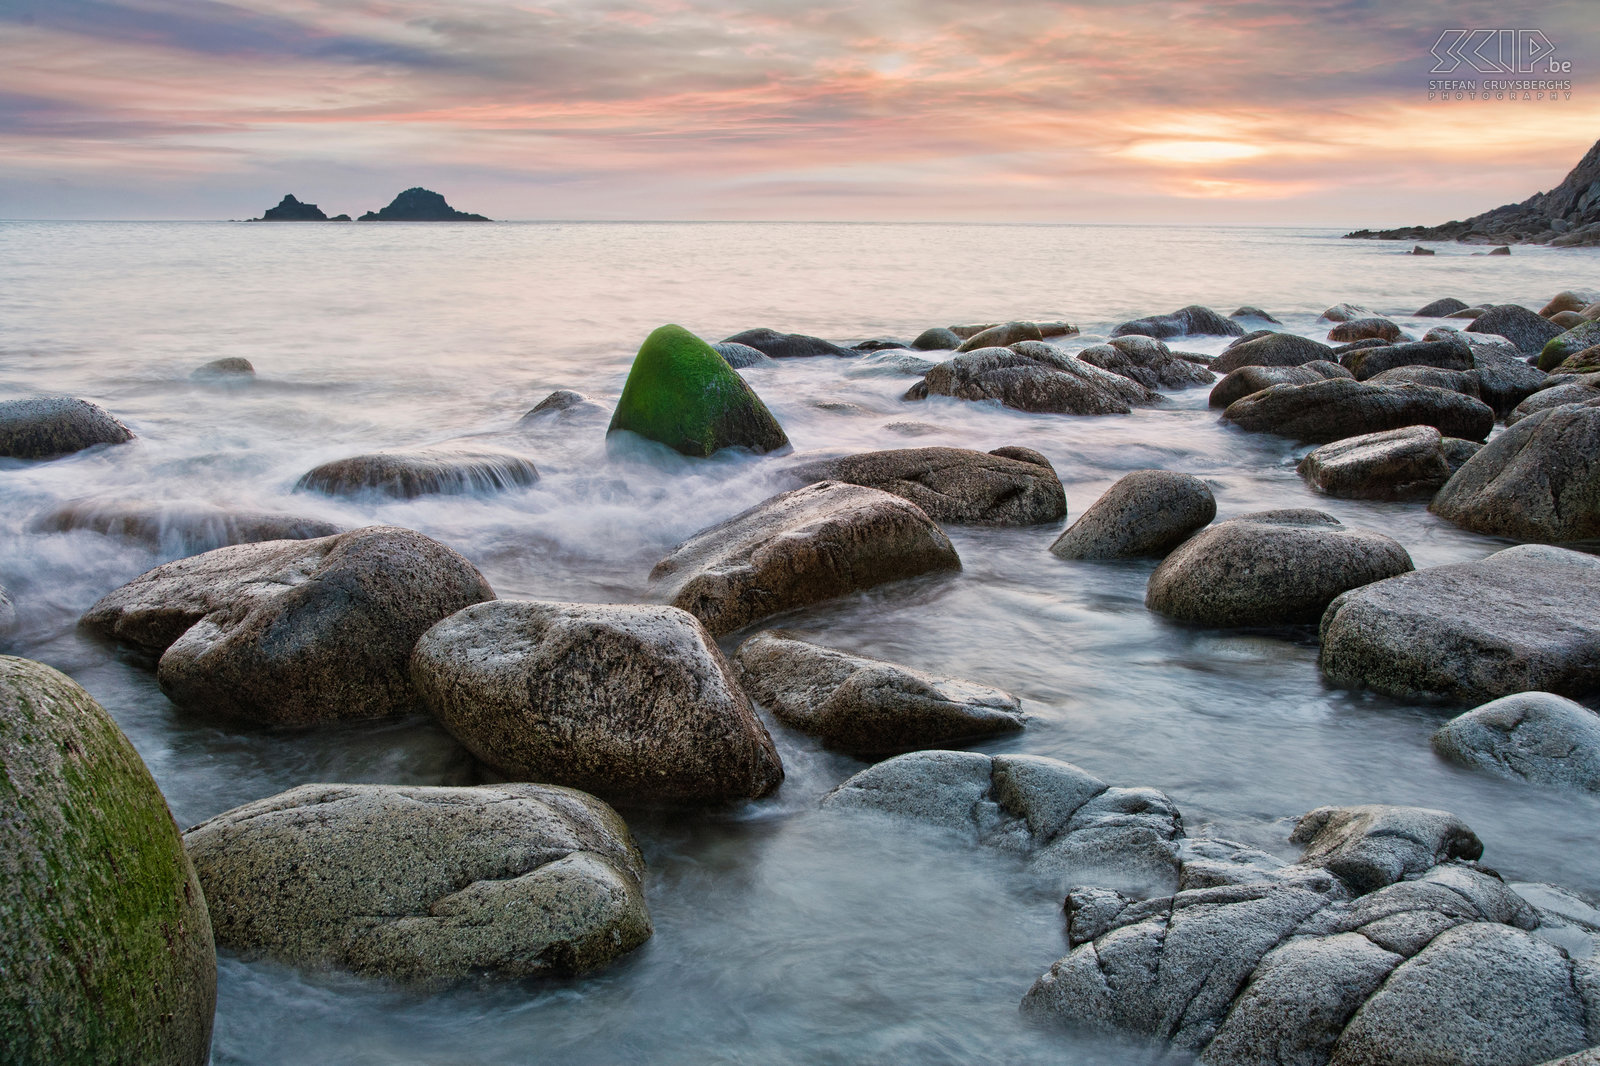 Porth Nanven / Cot Valley Beach A wonderful sunset on the rocky beach of Cot Valley. Stefan Cruysberghs